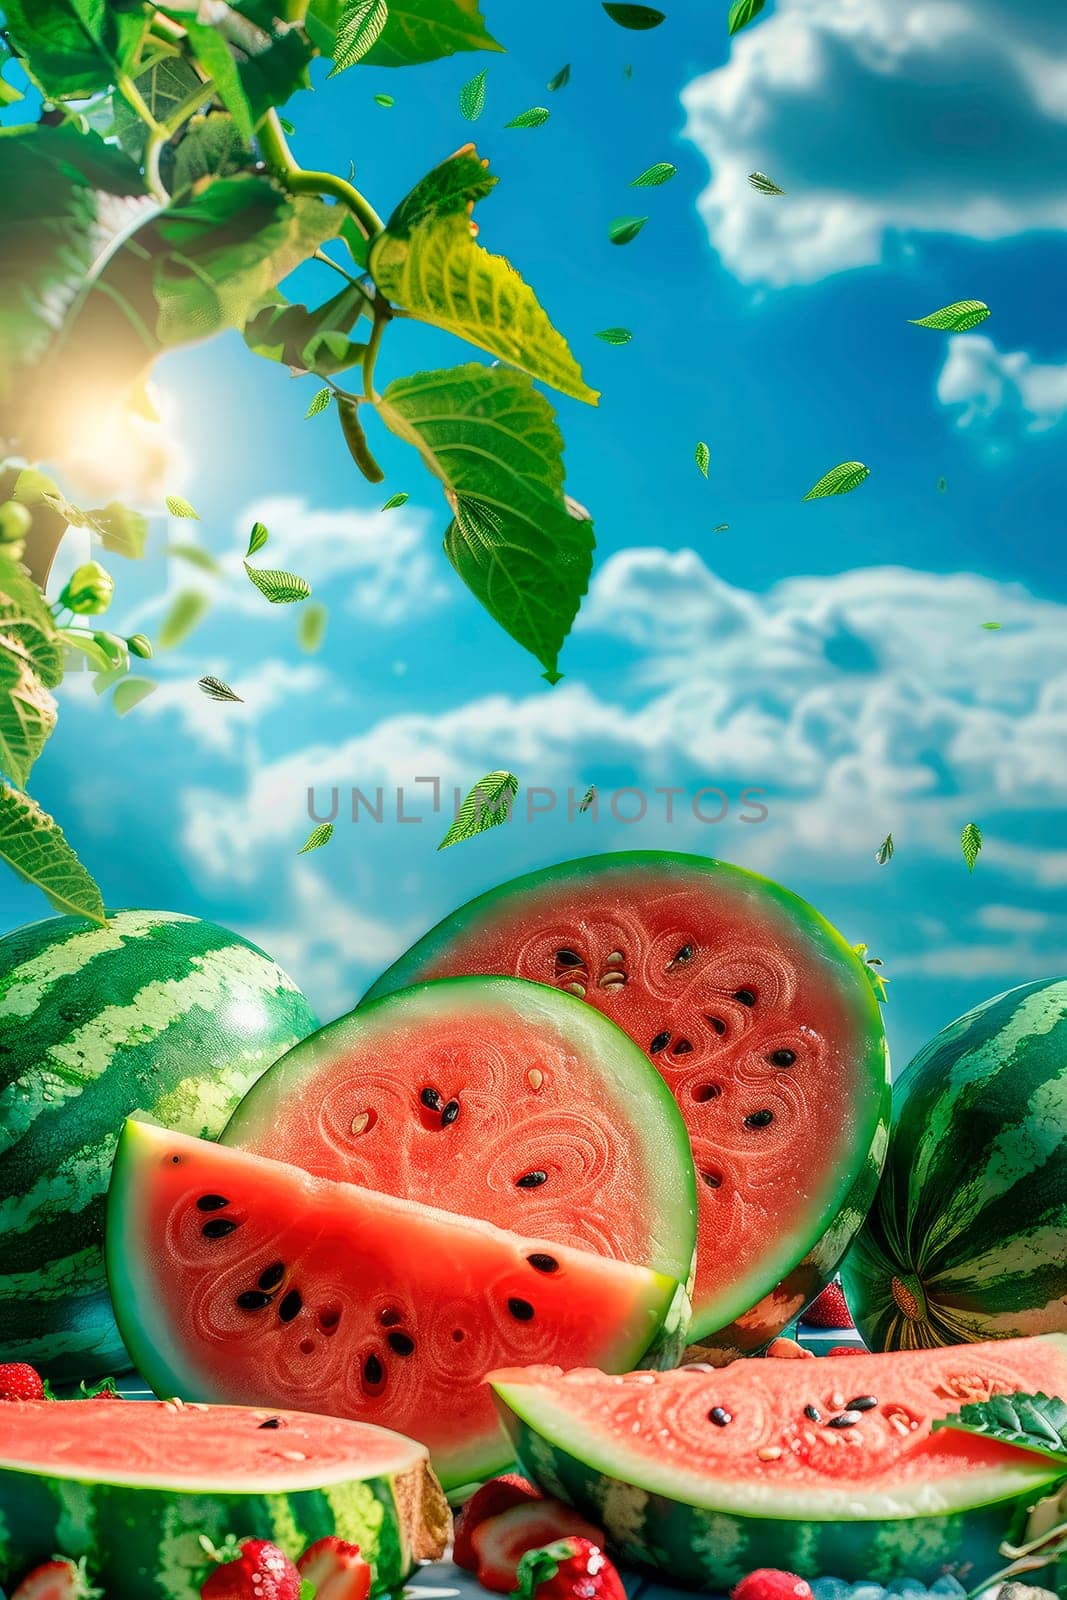 watermelon on a background of palm trees and sky. selective focus. nature.